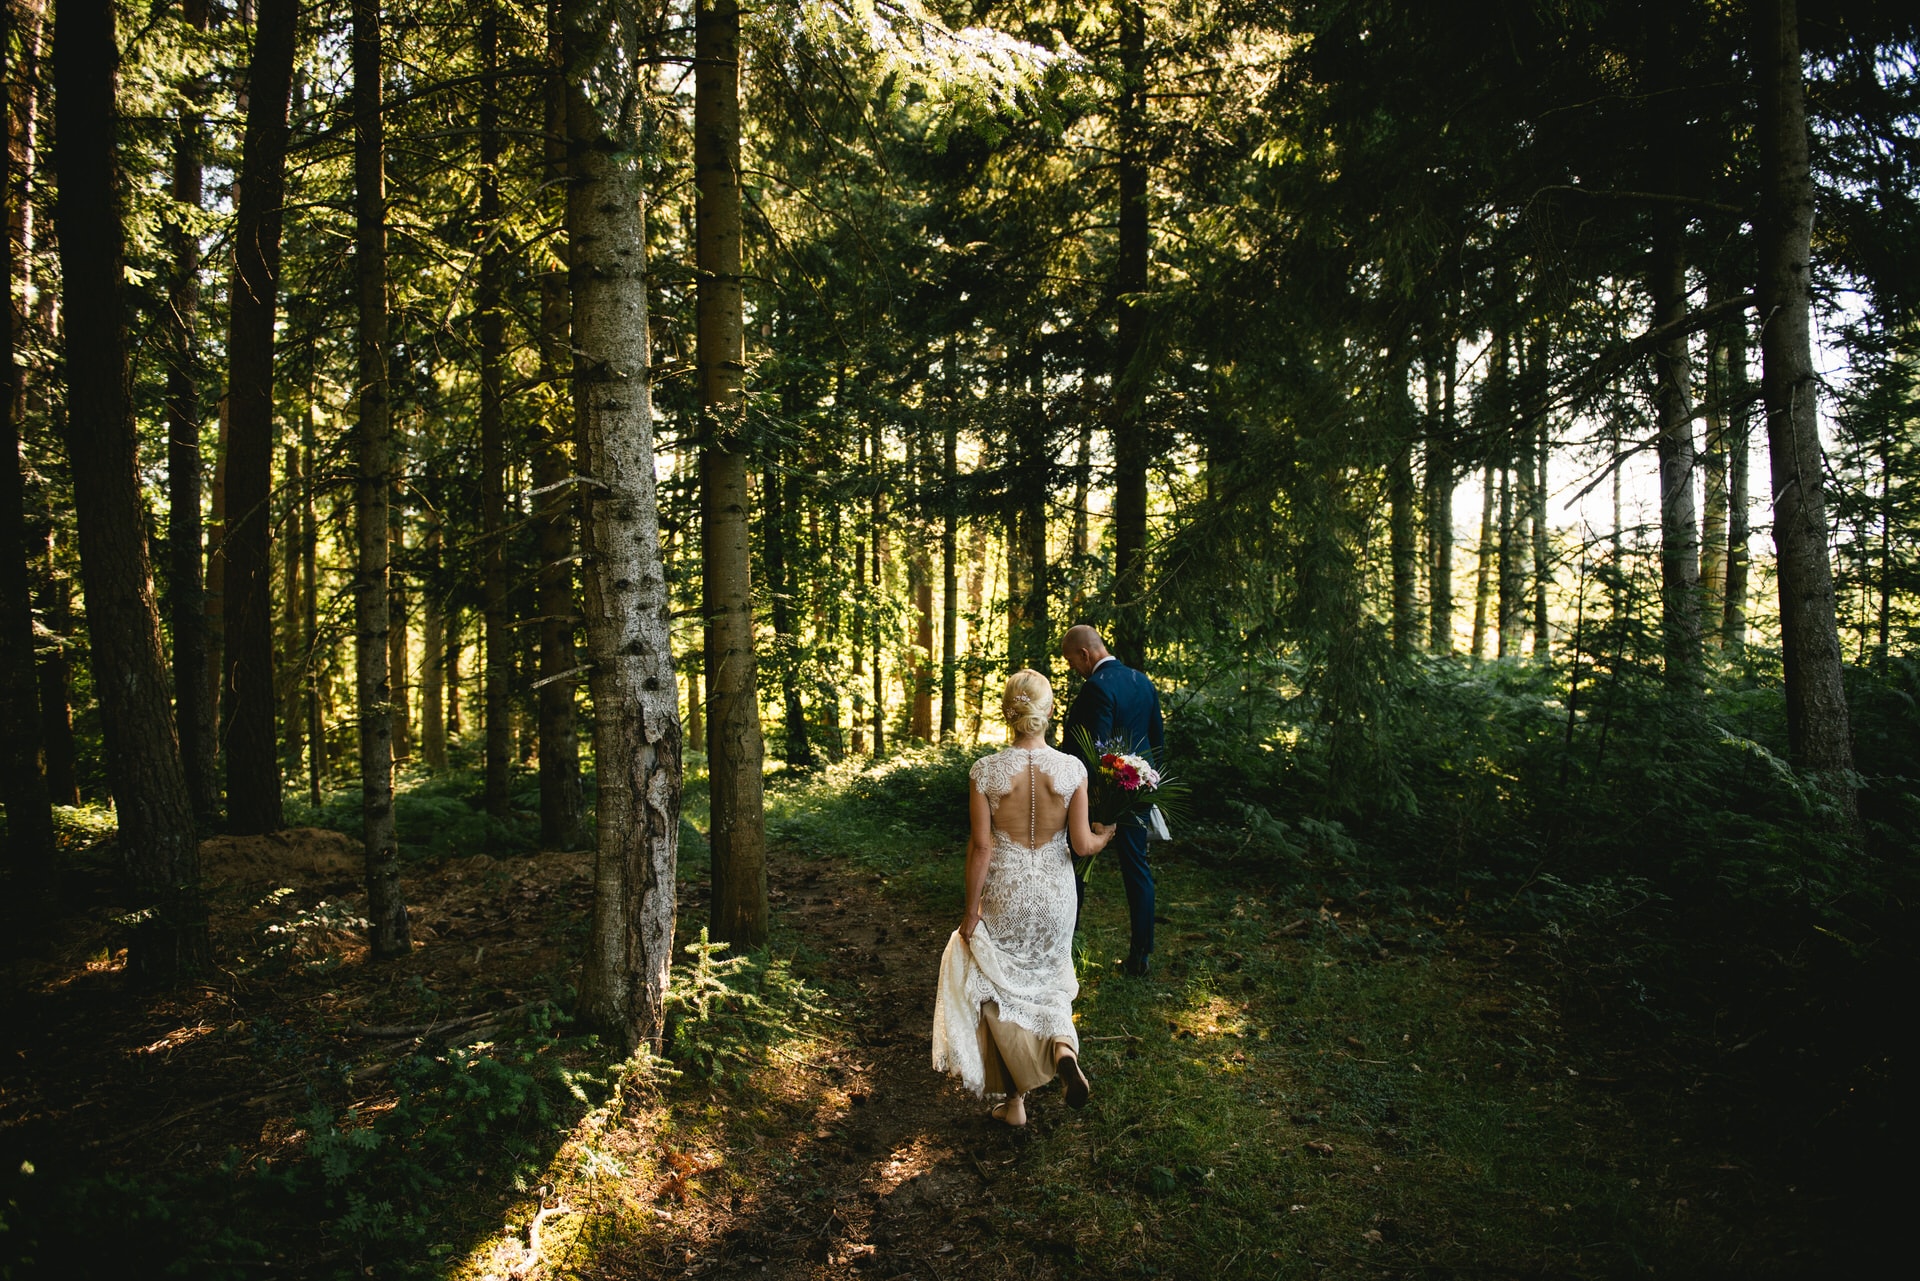 Bride and groom walking in the forest after their elopement ceremony in Central France